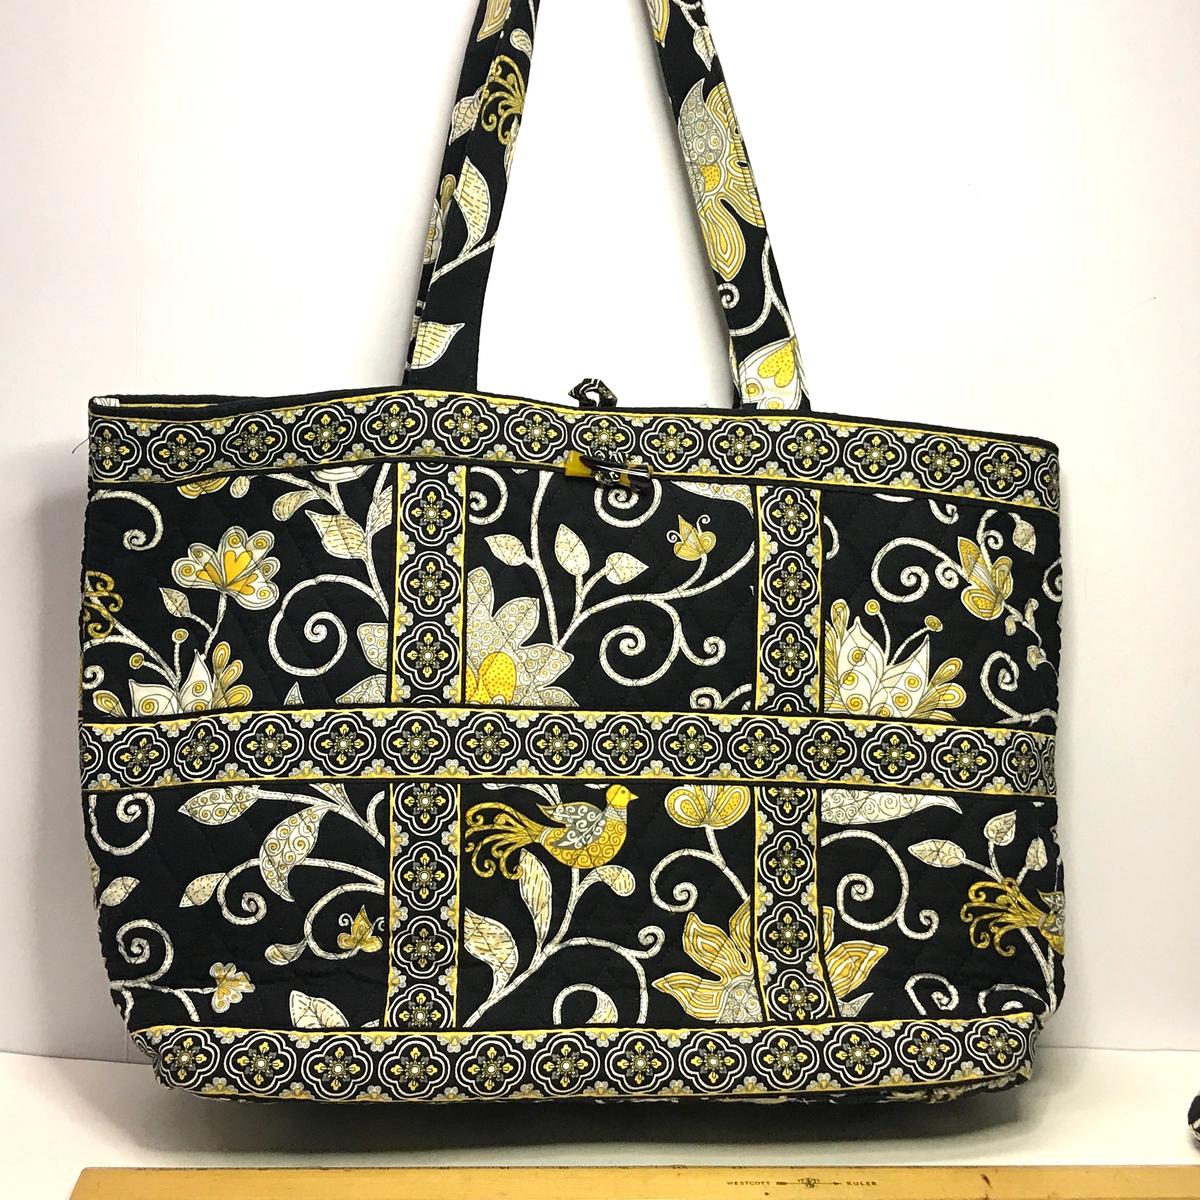 Pretty Quilted Vera Bradley Tote Bag in Black & Yellow